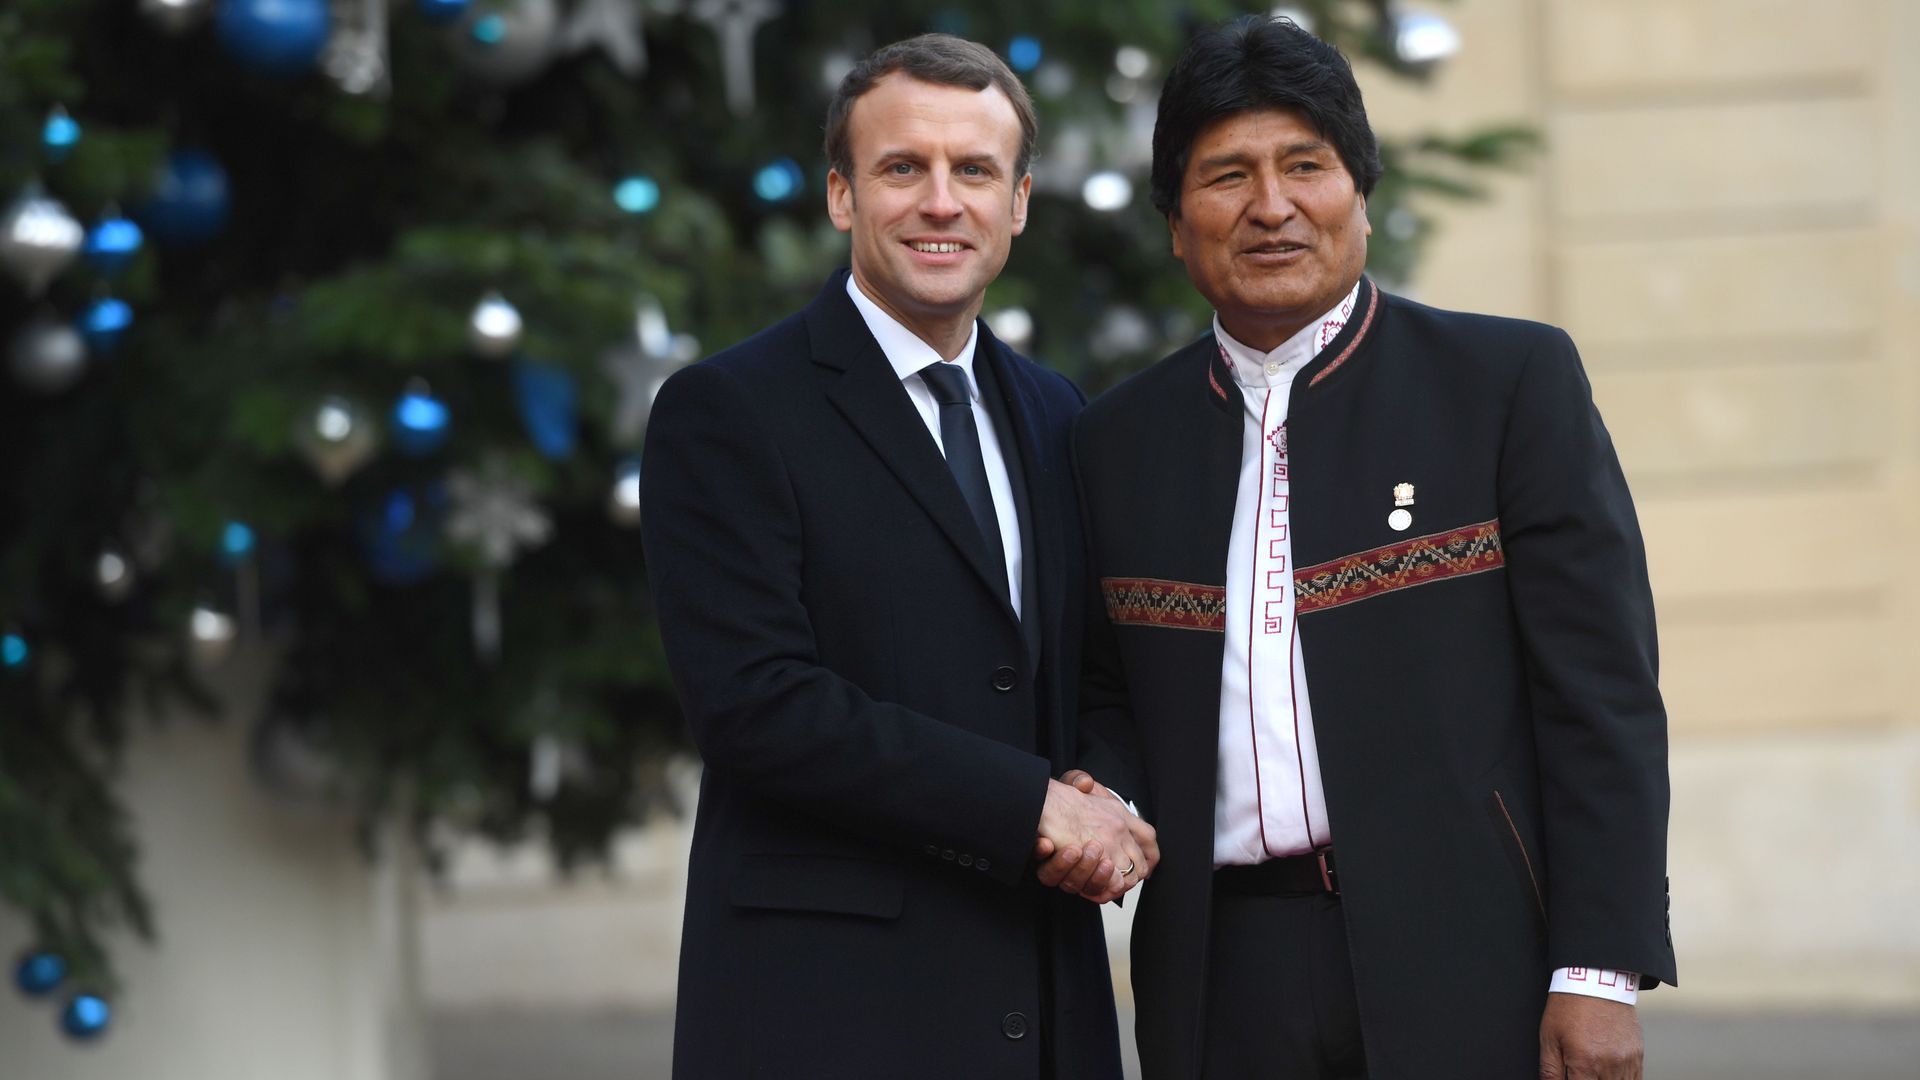 French President Emmanuel Macron greets Bolivian President Evo Morales upon his arrival at the Elysée palace on December 12, 2017.